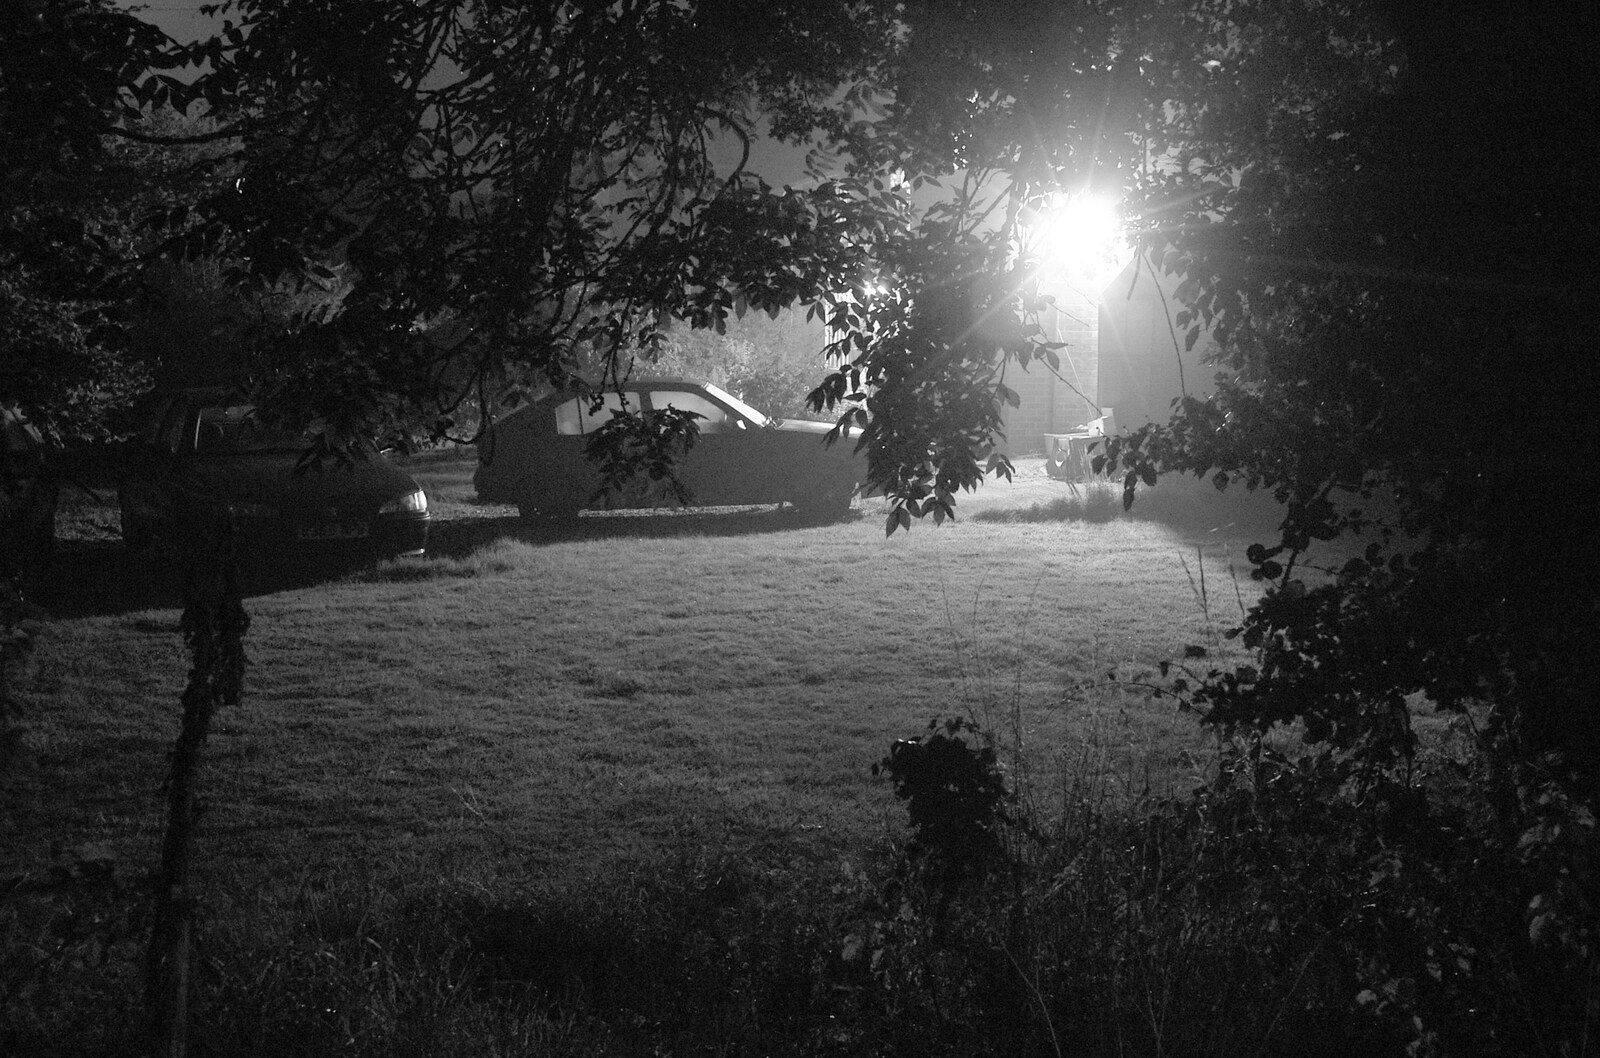 A view in the dark from Life on the Neonatal Ward, Dairy Farm and Thrandeston Chapel, Suffolk - 26th August 2005